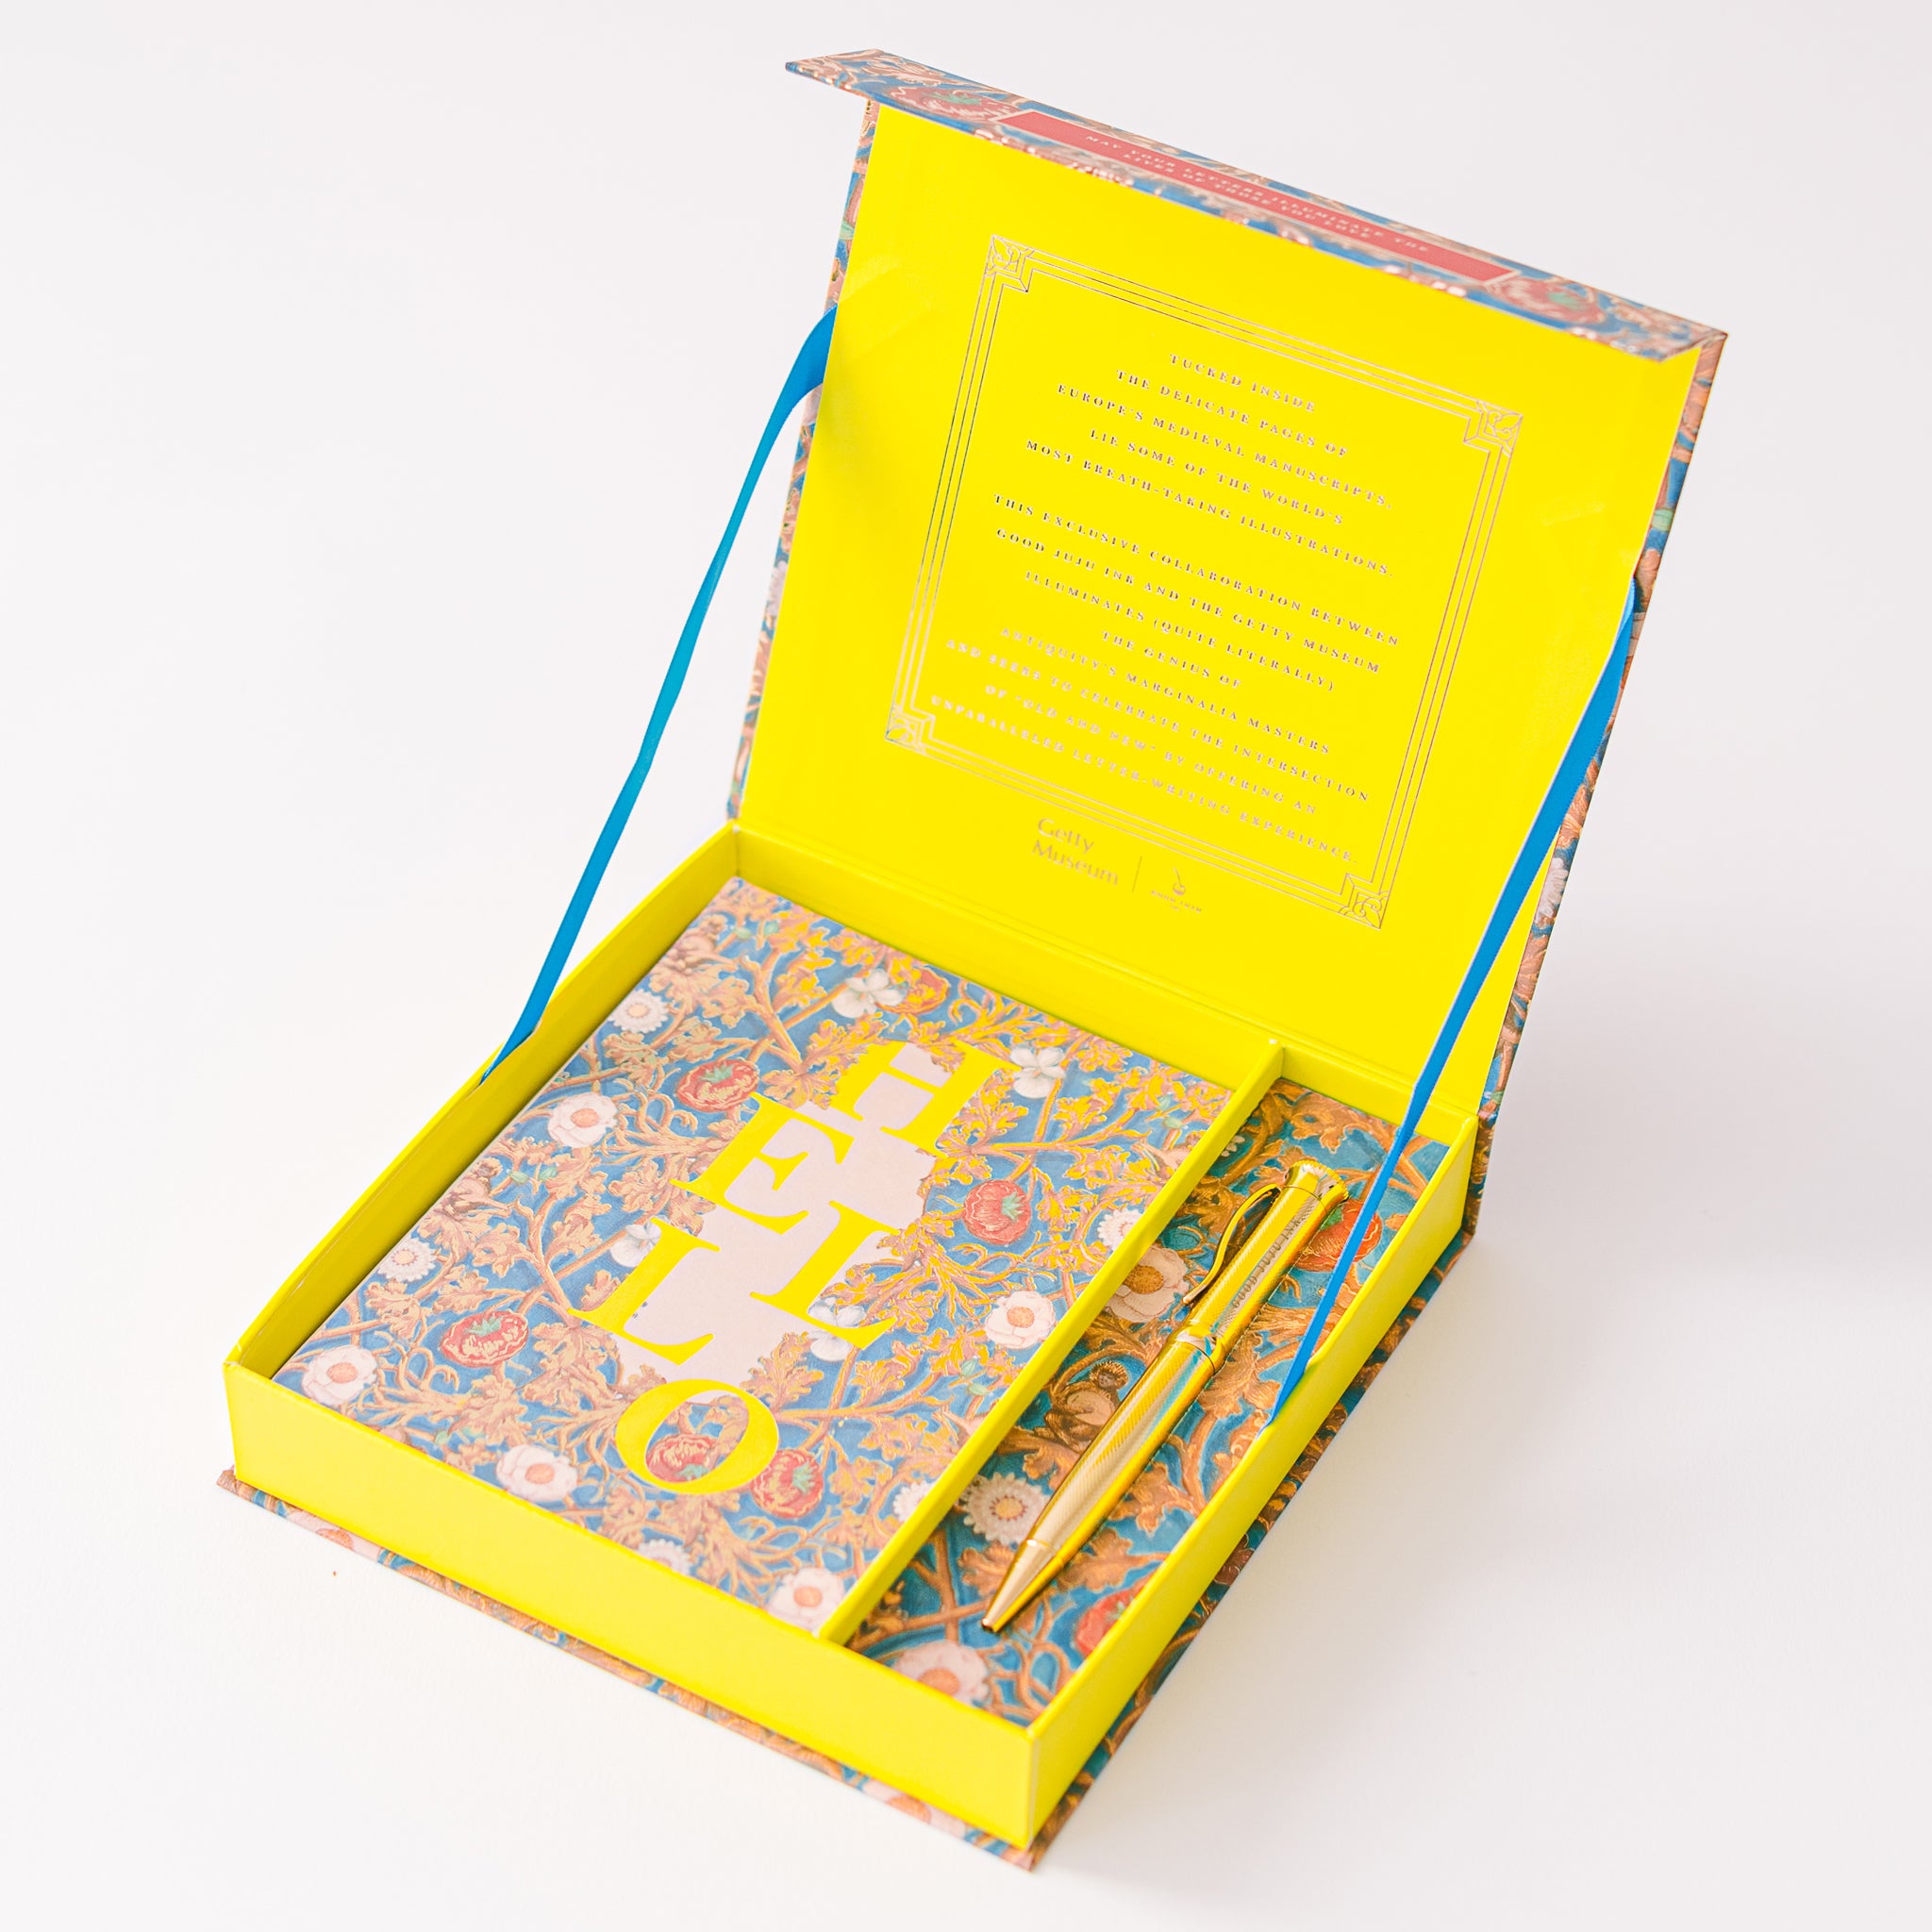 Deluxe Stationery Box - All in One Stationery Set